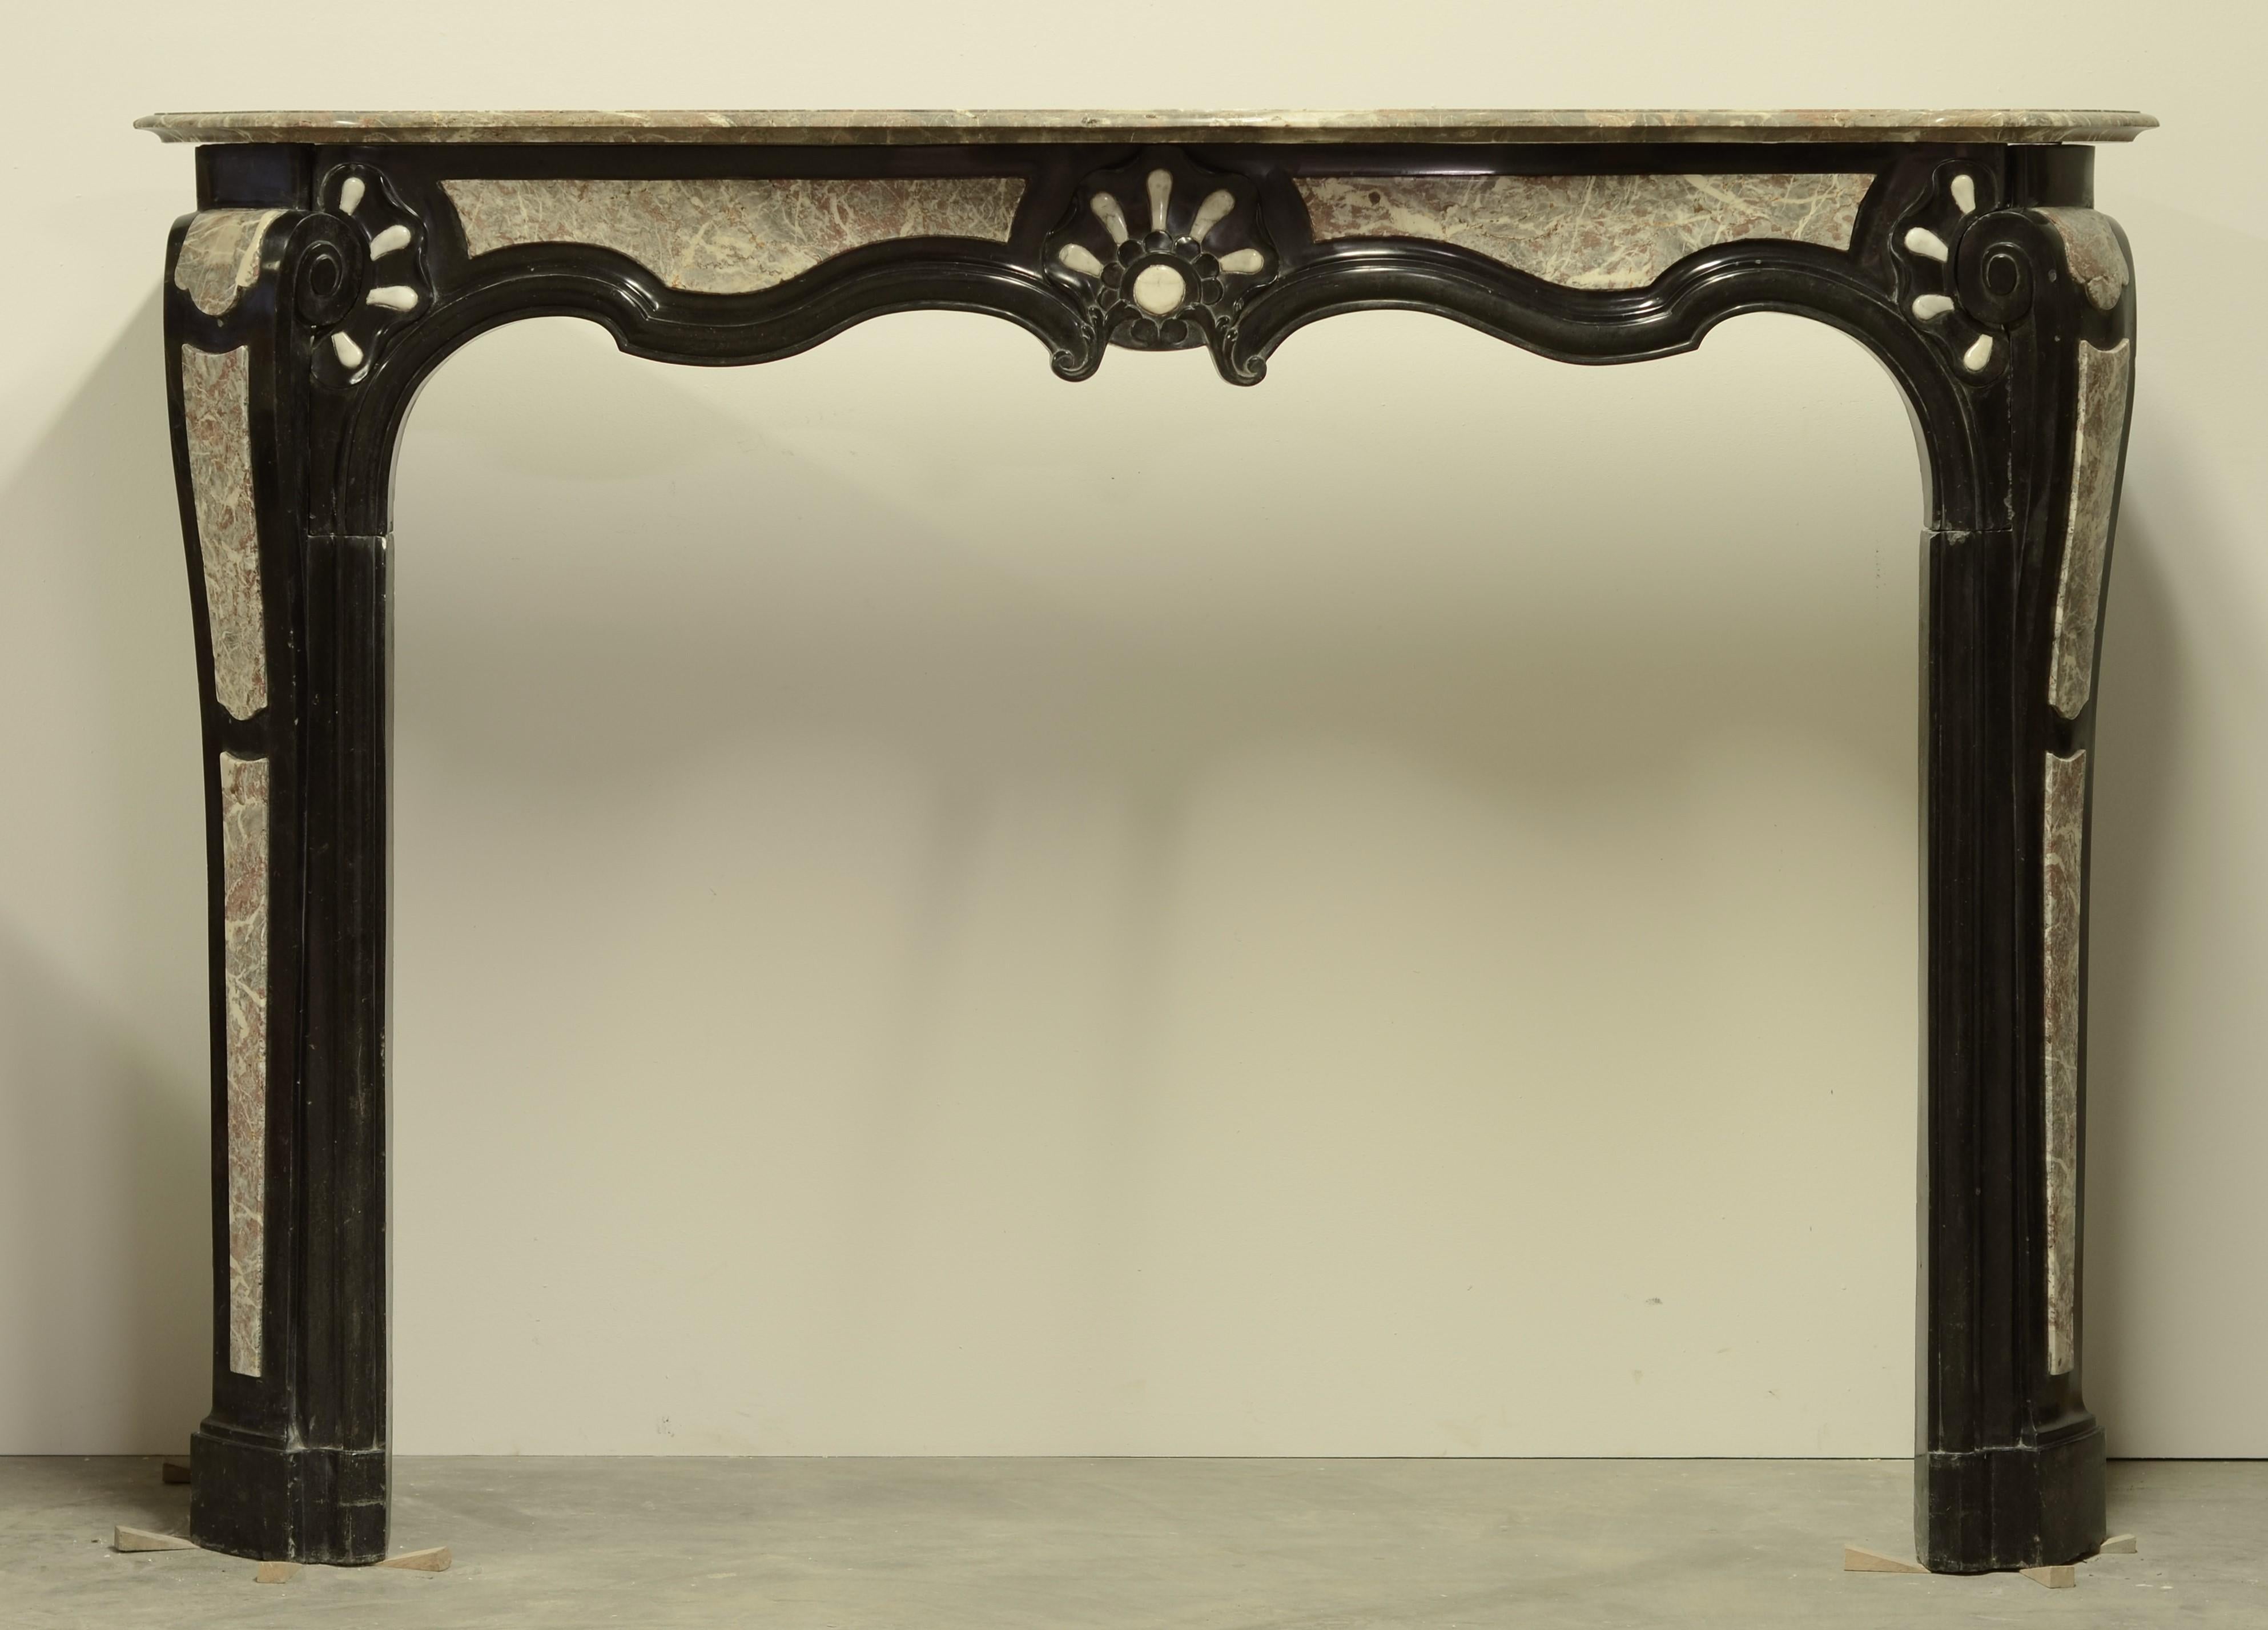 This rare, large 18th century Louis XIV mantelpiece from Leuven (Belgium) is realized in three different types of marble:

Noir de Mazy - The black marble from Belgium.
Rouge Royal - Belgian red marble.
White Carrara marble from